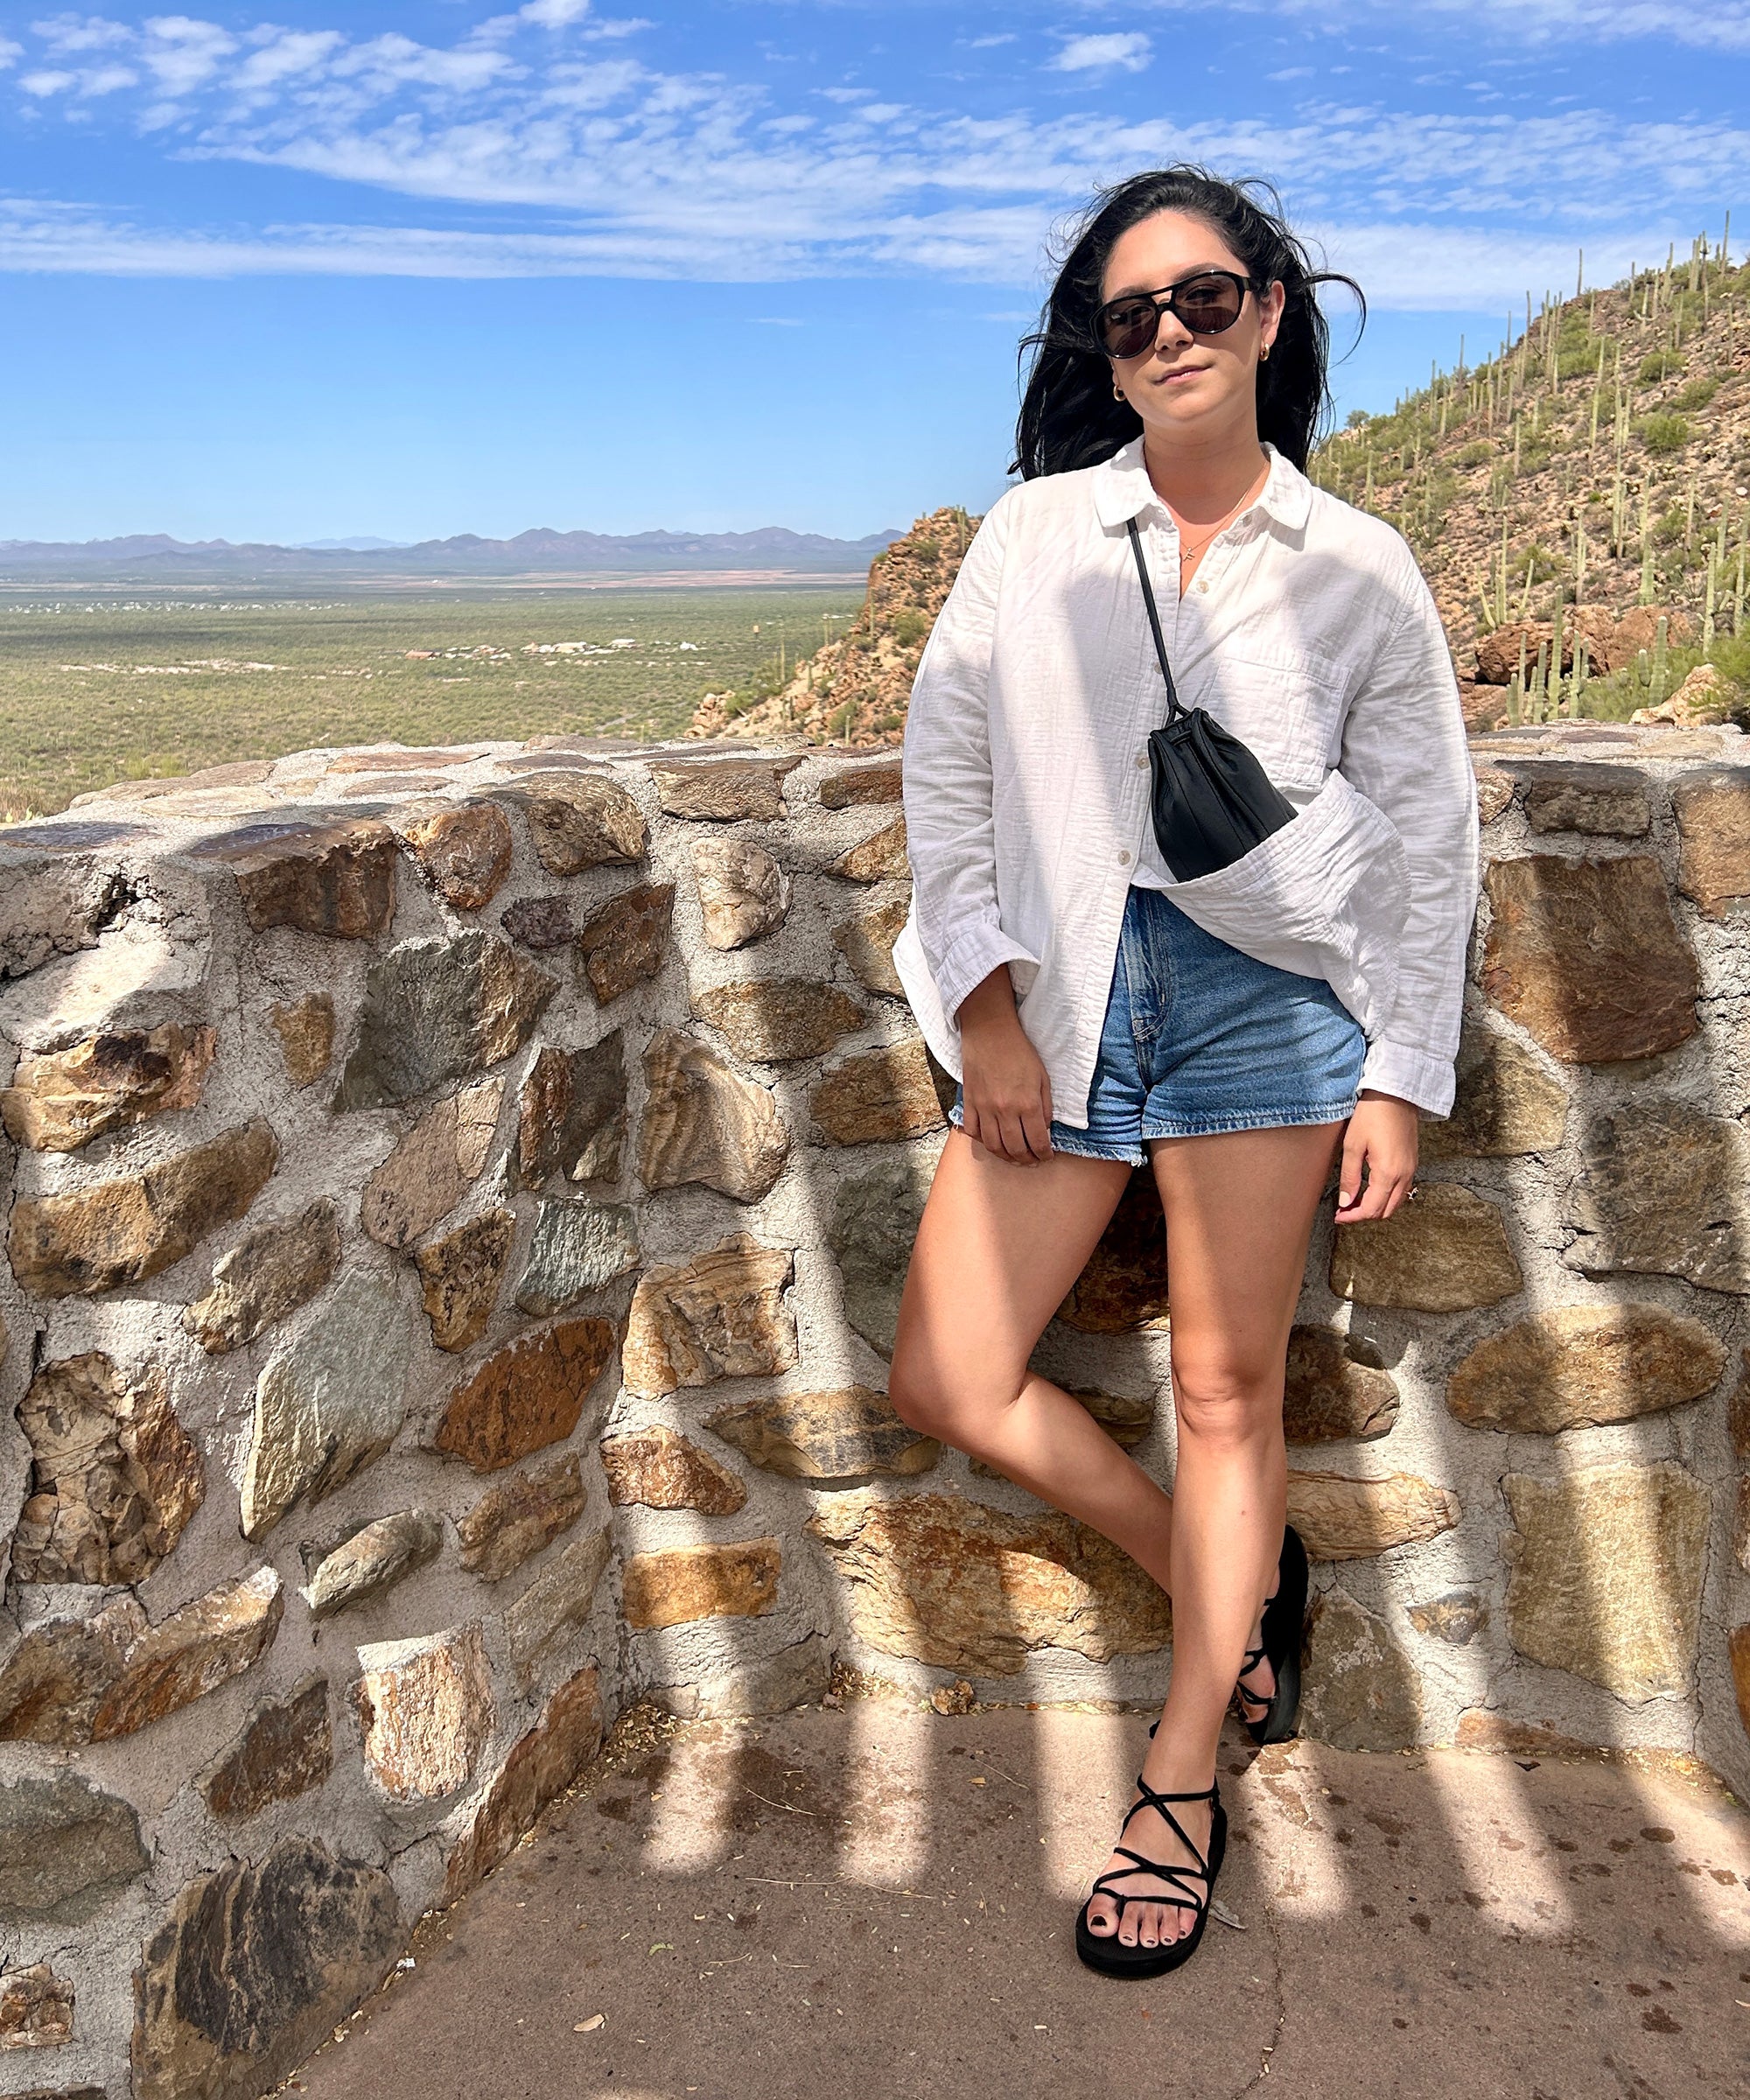 12 Stylist-Approved White Sneakers and Shorts Outfits